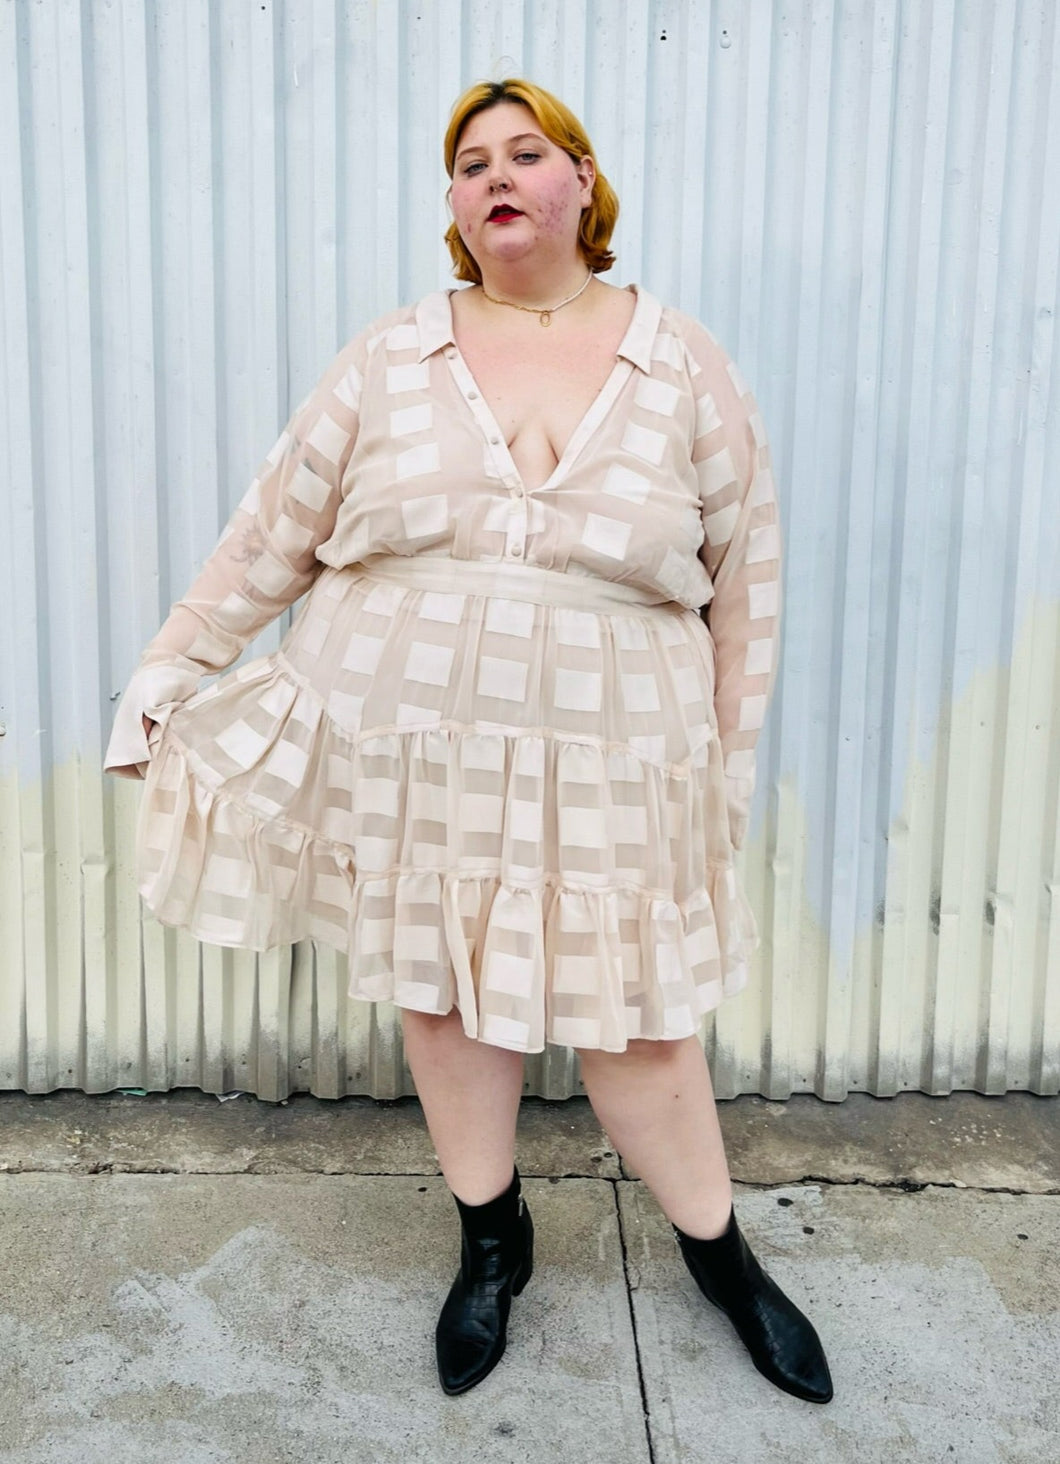 Full-body front view of a size 26 ASOS cream colored square pattern sheer mesh tiered button-up shirt dress with cream lining styled with black boots on a size 22/24 model. The photo is taken outside in natural lighting.